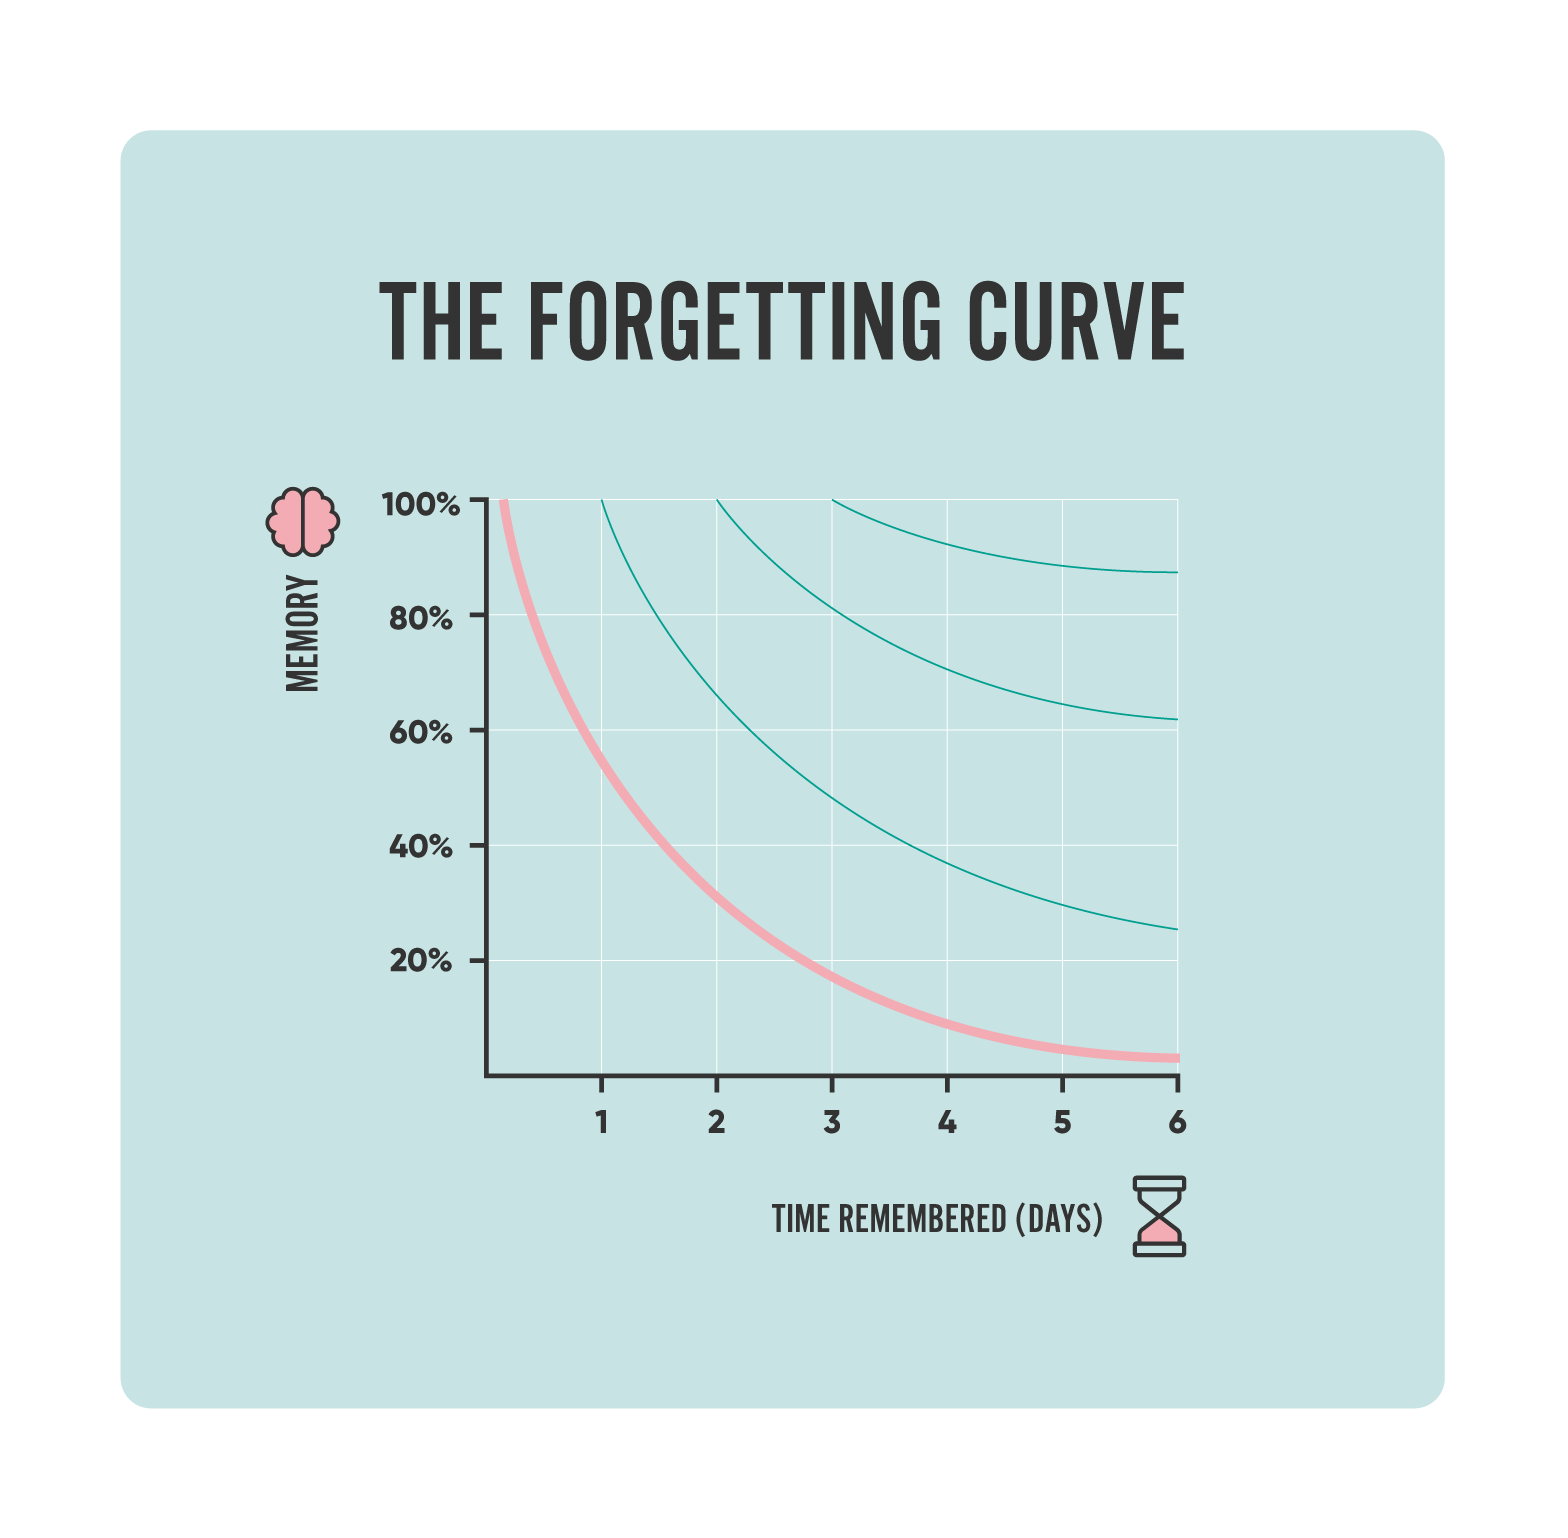 The Ebbinghaus Forgetting Curve